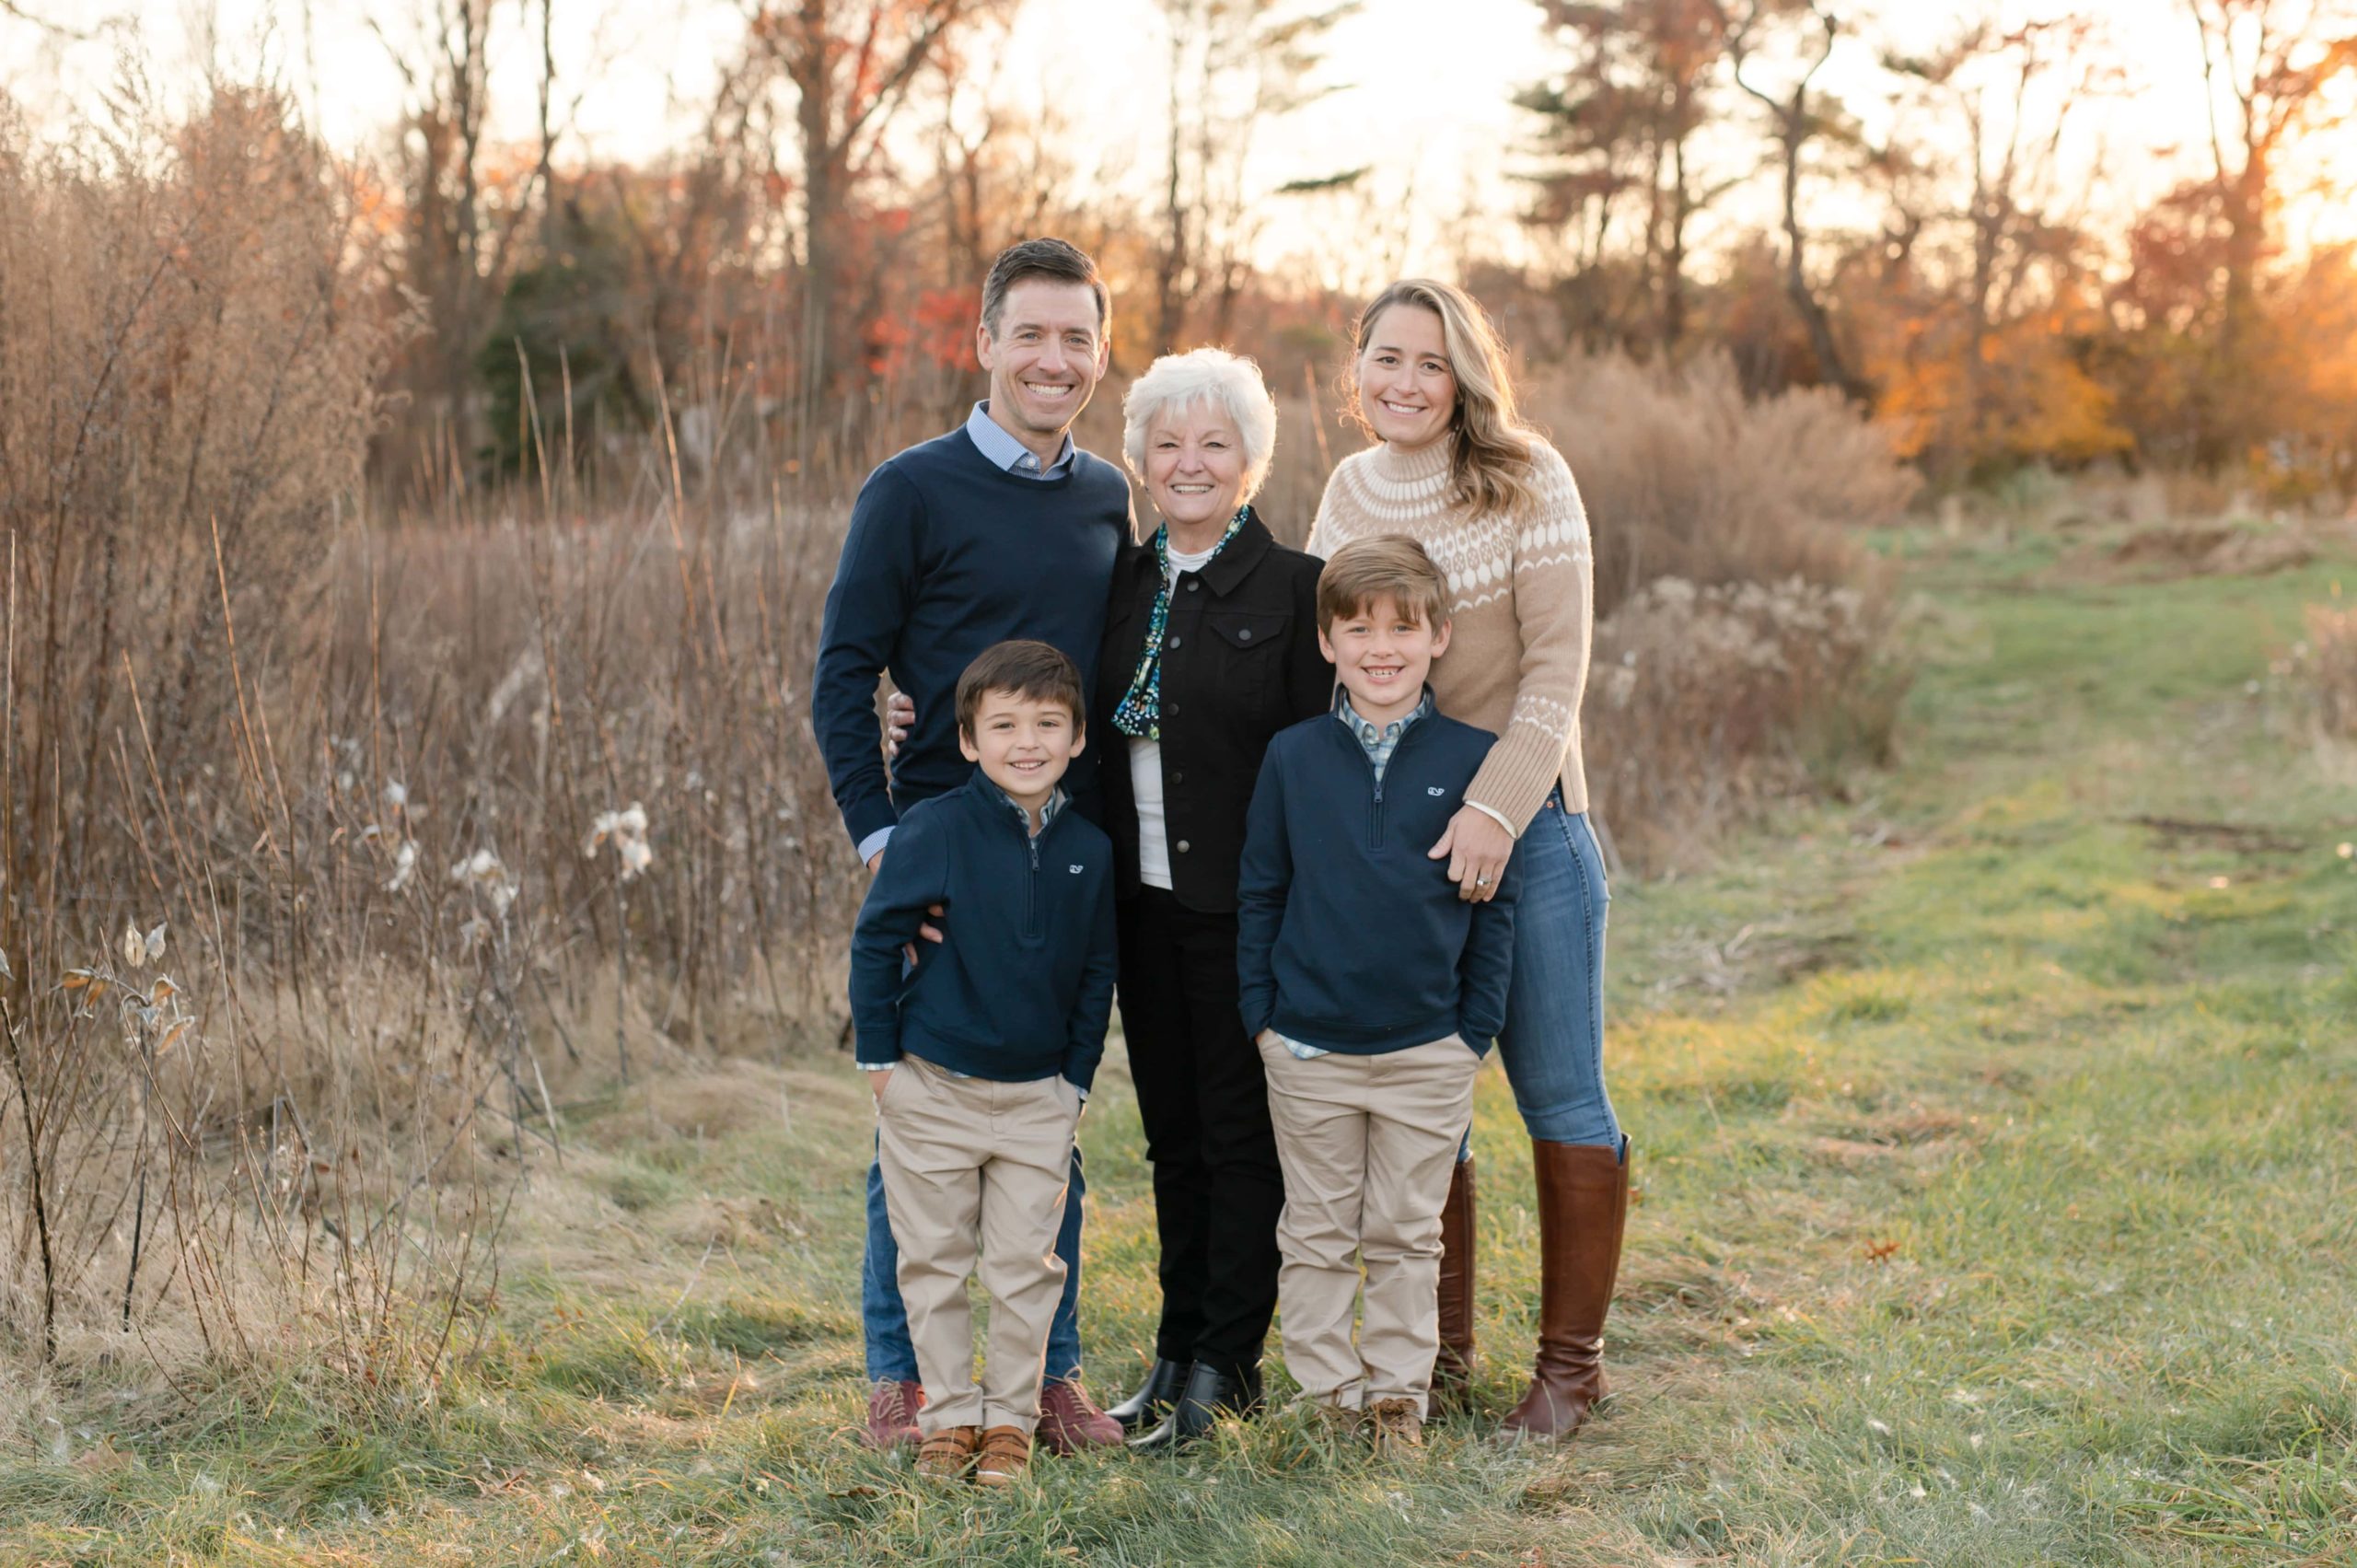 Family photos in navy at golden hour